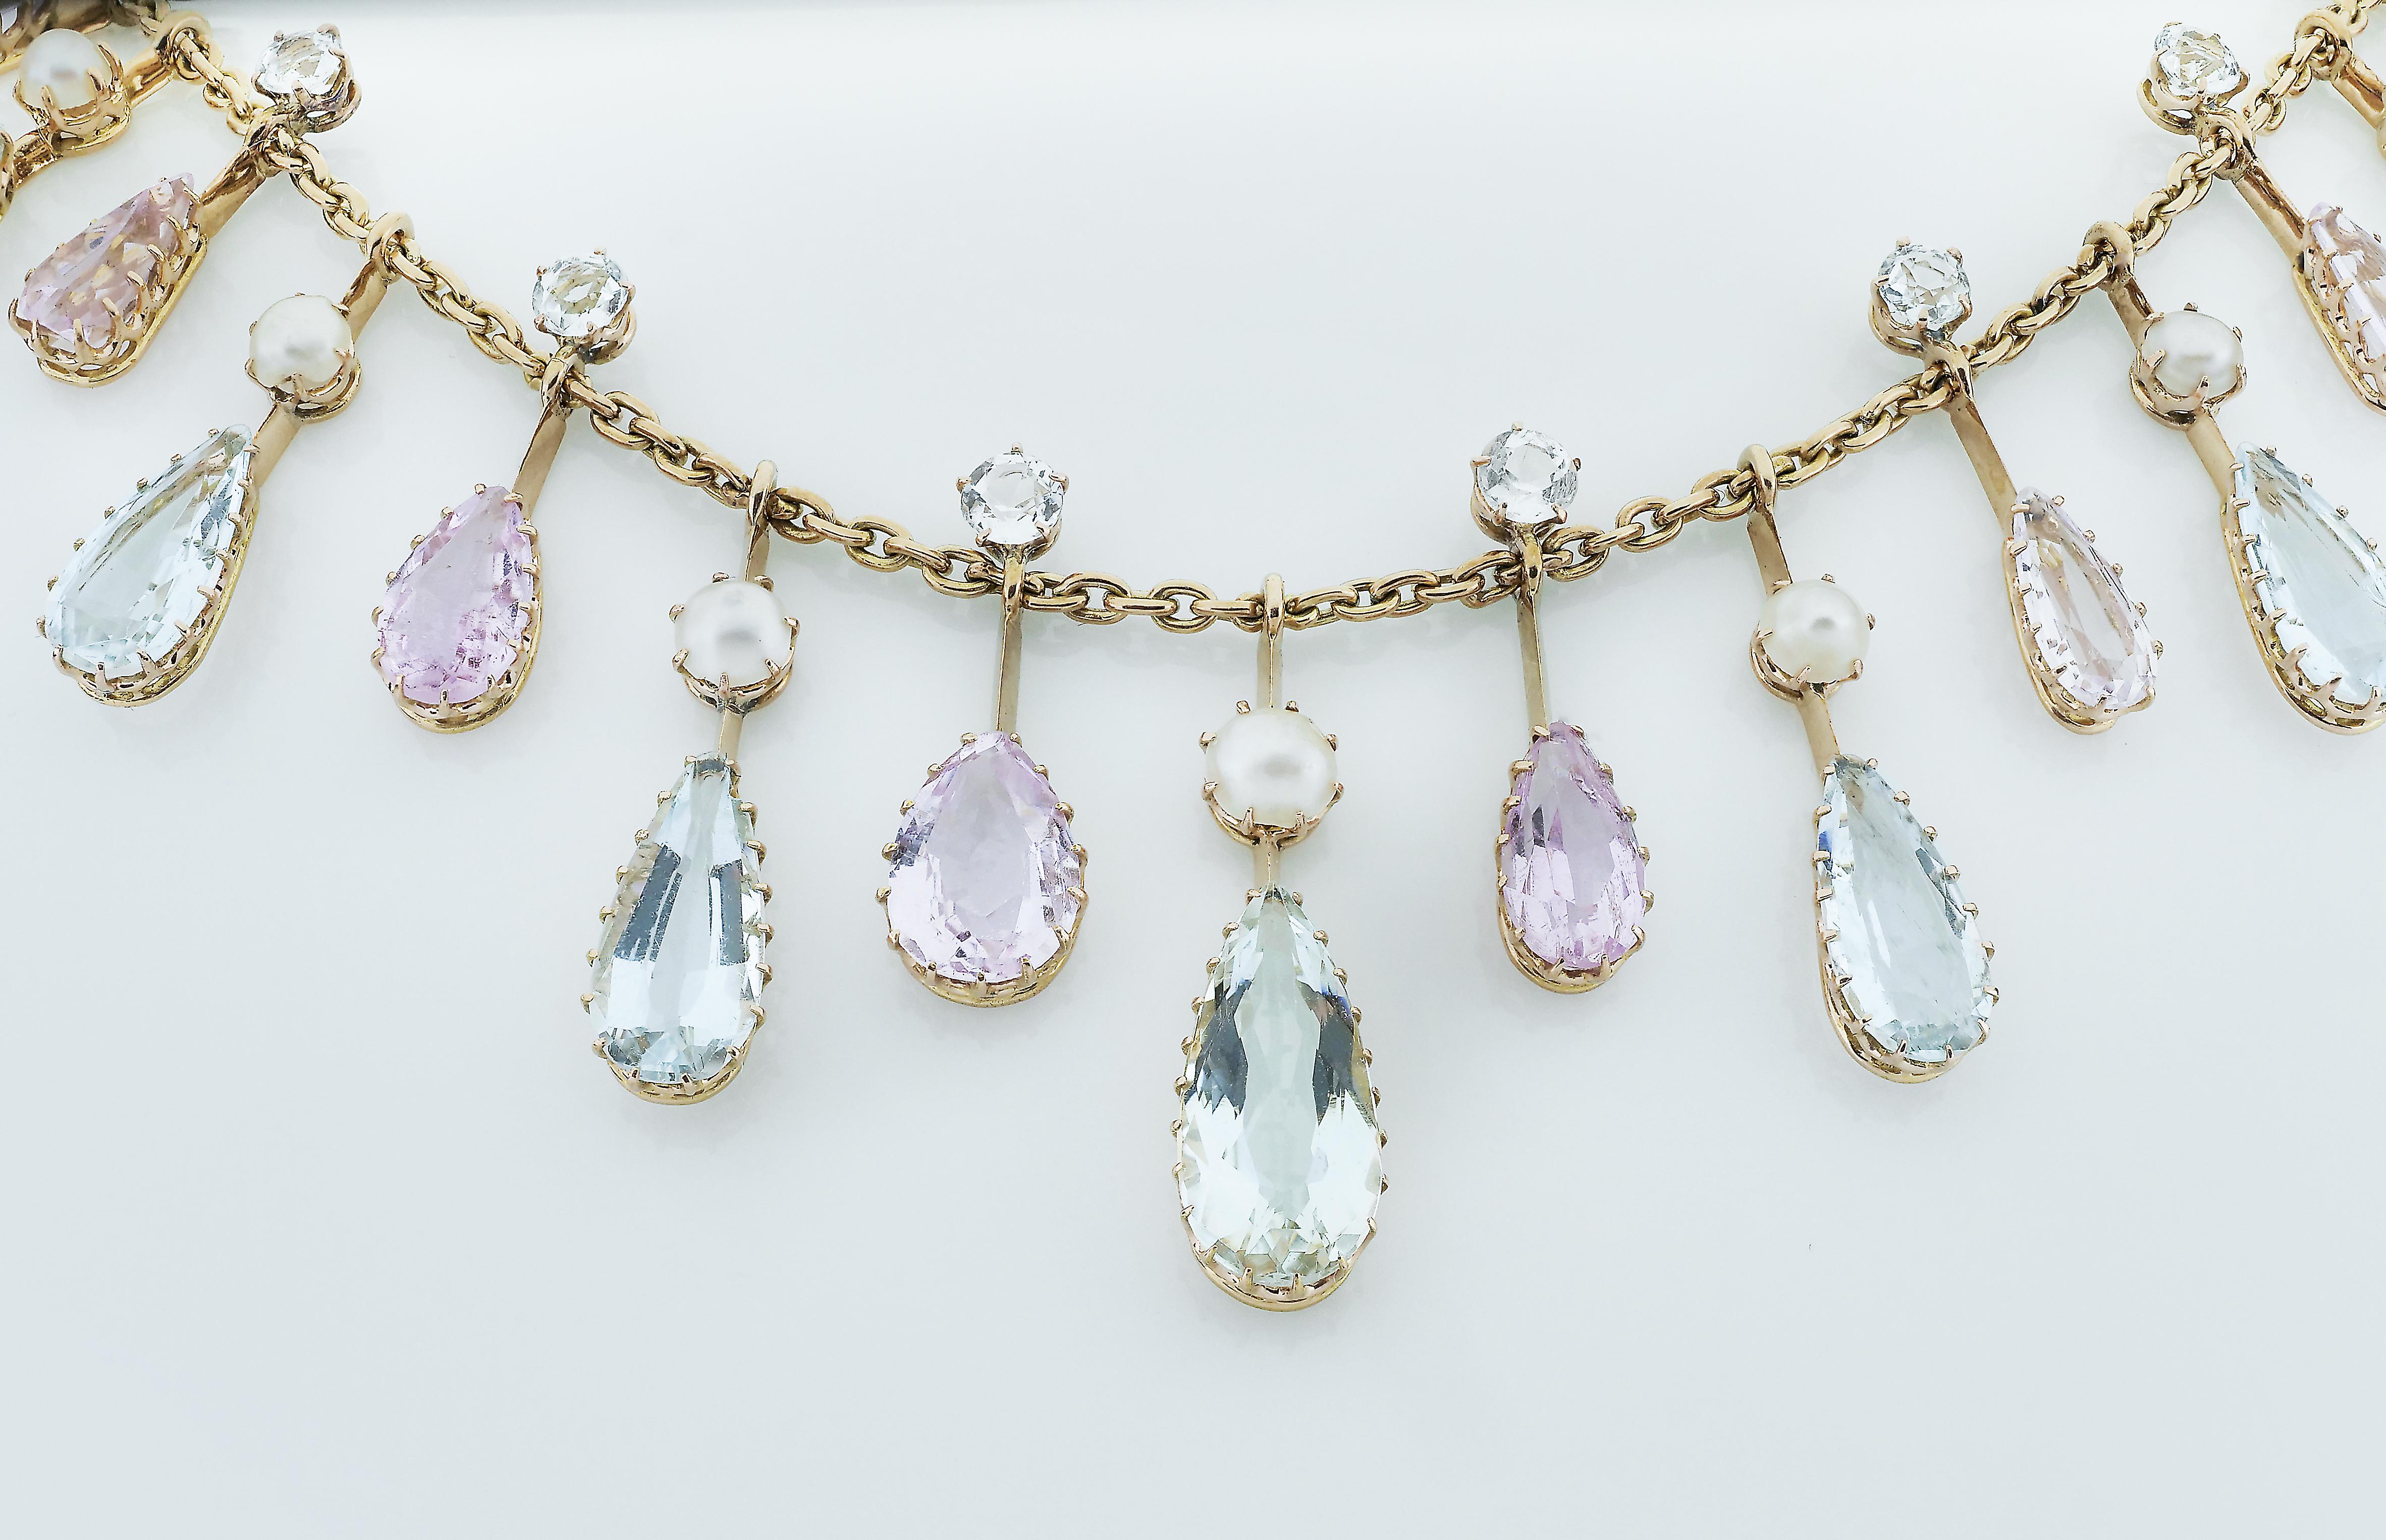 Timeless antique necklace travelling from the 1900. A beautiful fringe necklace set with pink topaz and aquamarine in it’s original fitted box. The necklace design as alternating pattern of dangling pink topaz and sky blue aquamarine. On each